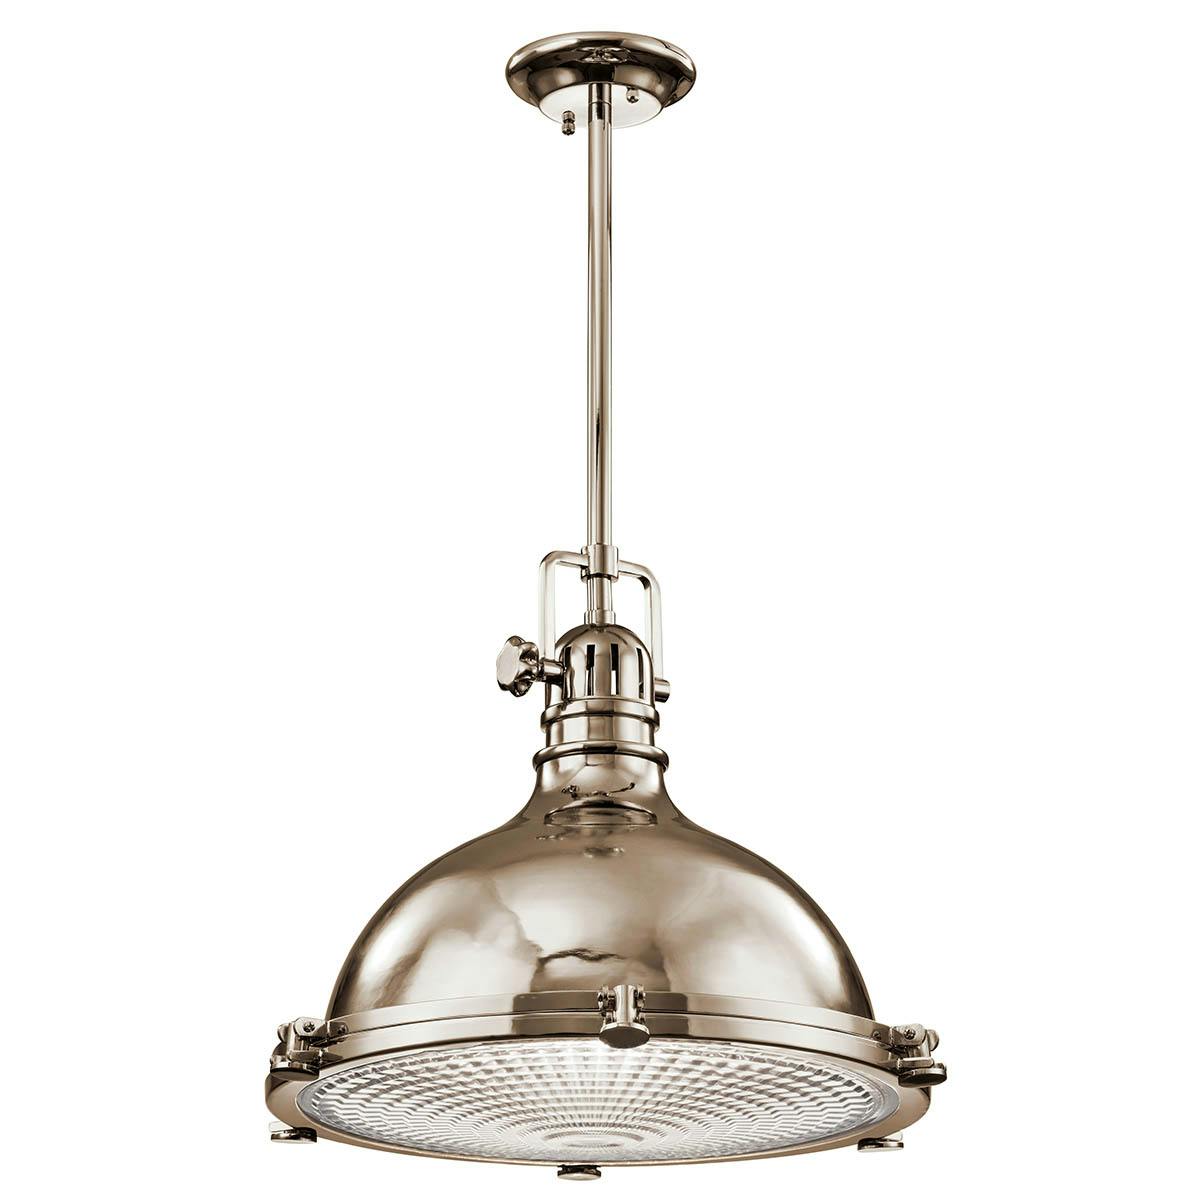 Hatteras Bay 19.5" Pendant Nickel on a white background